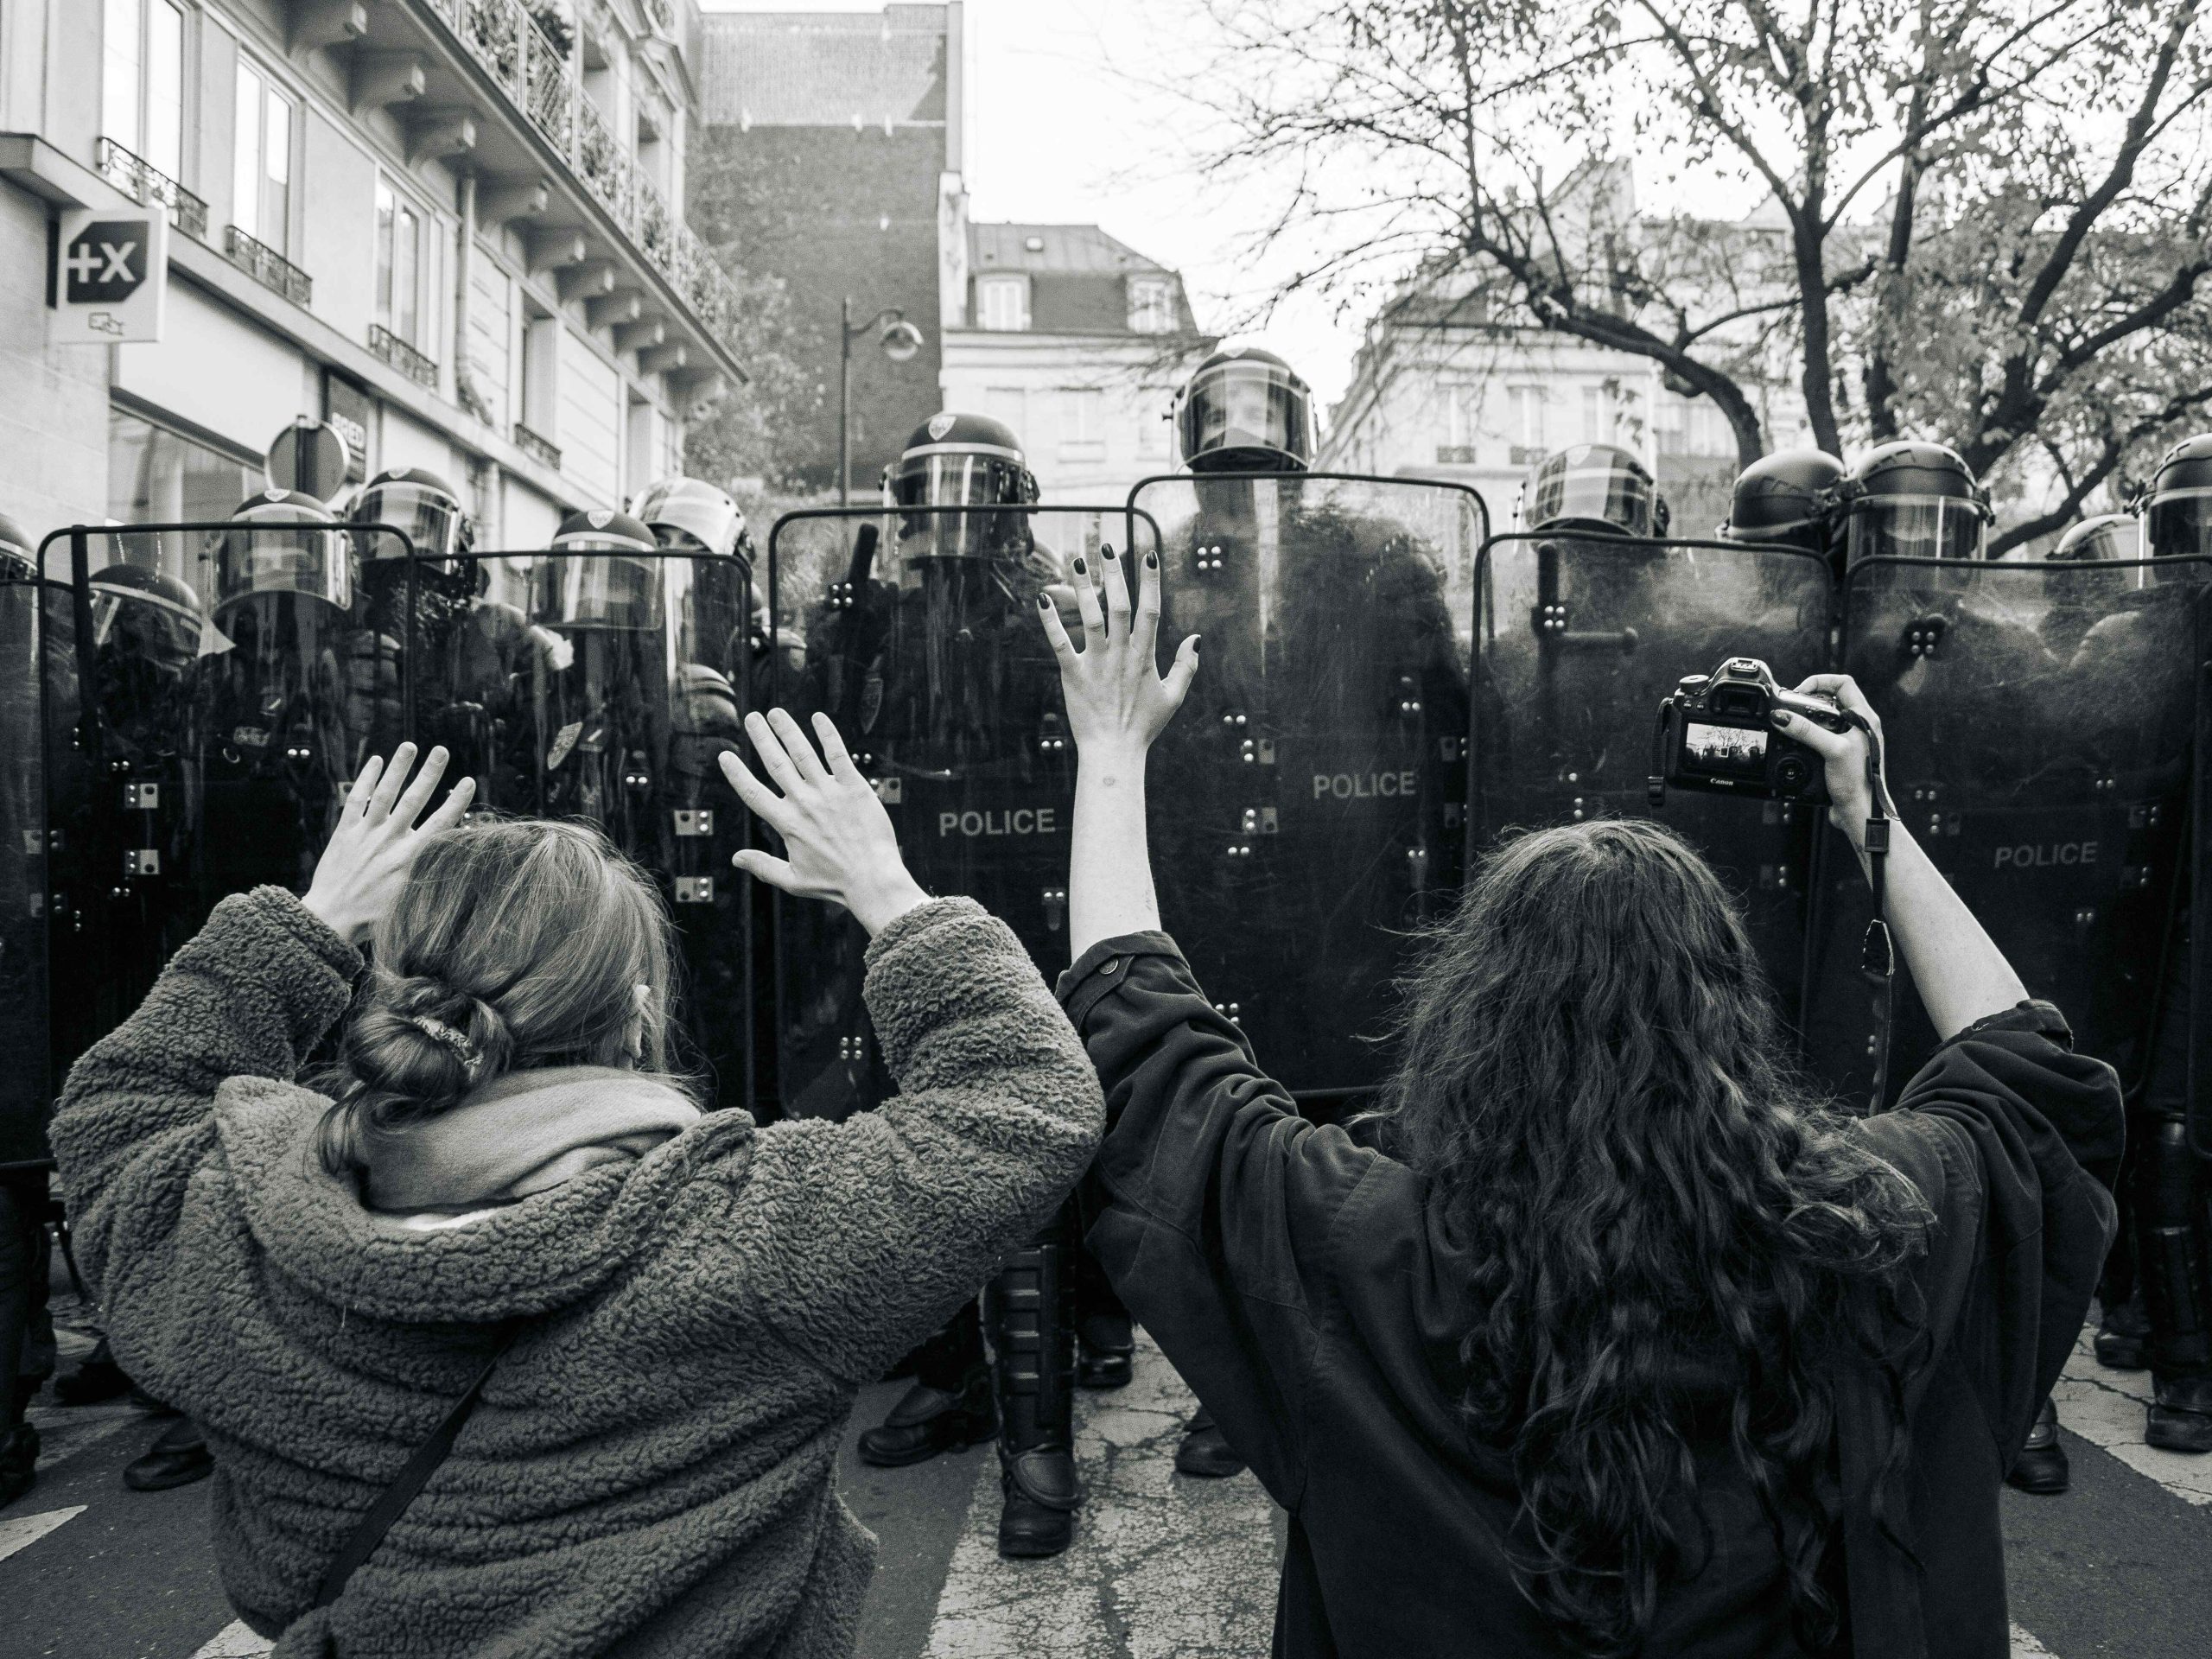 Shows two protesters with their backs to the camera lens facing a line police officers with shields.